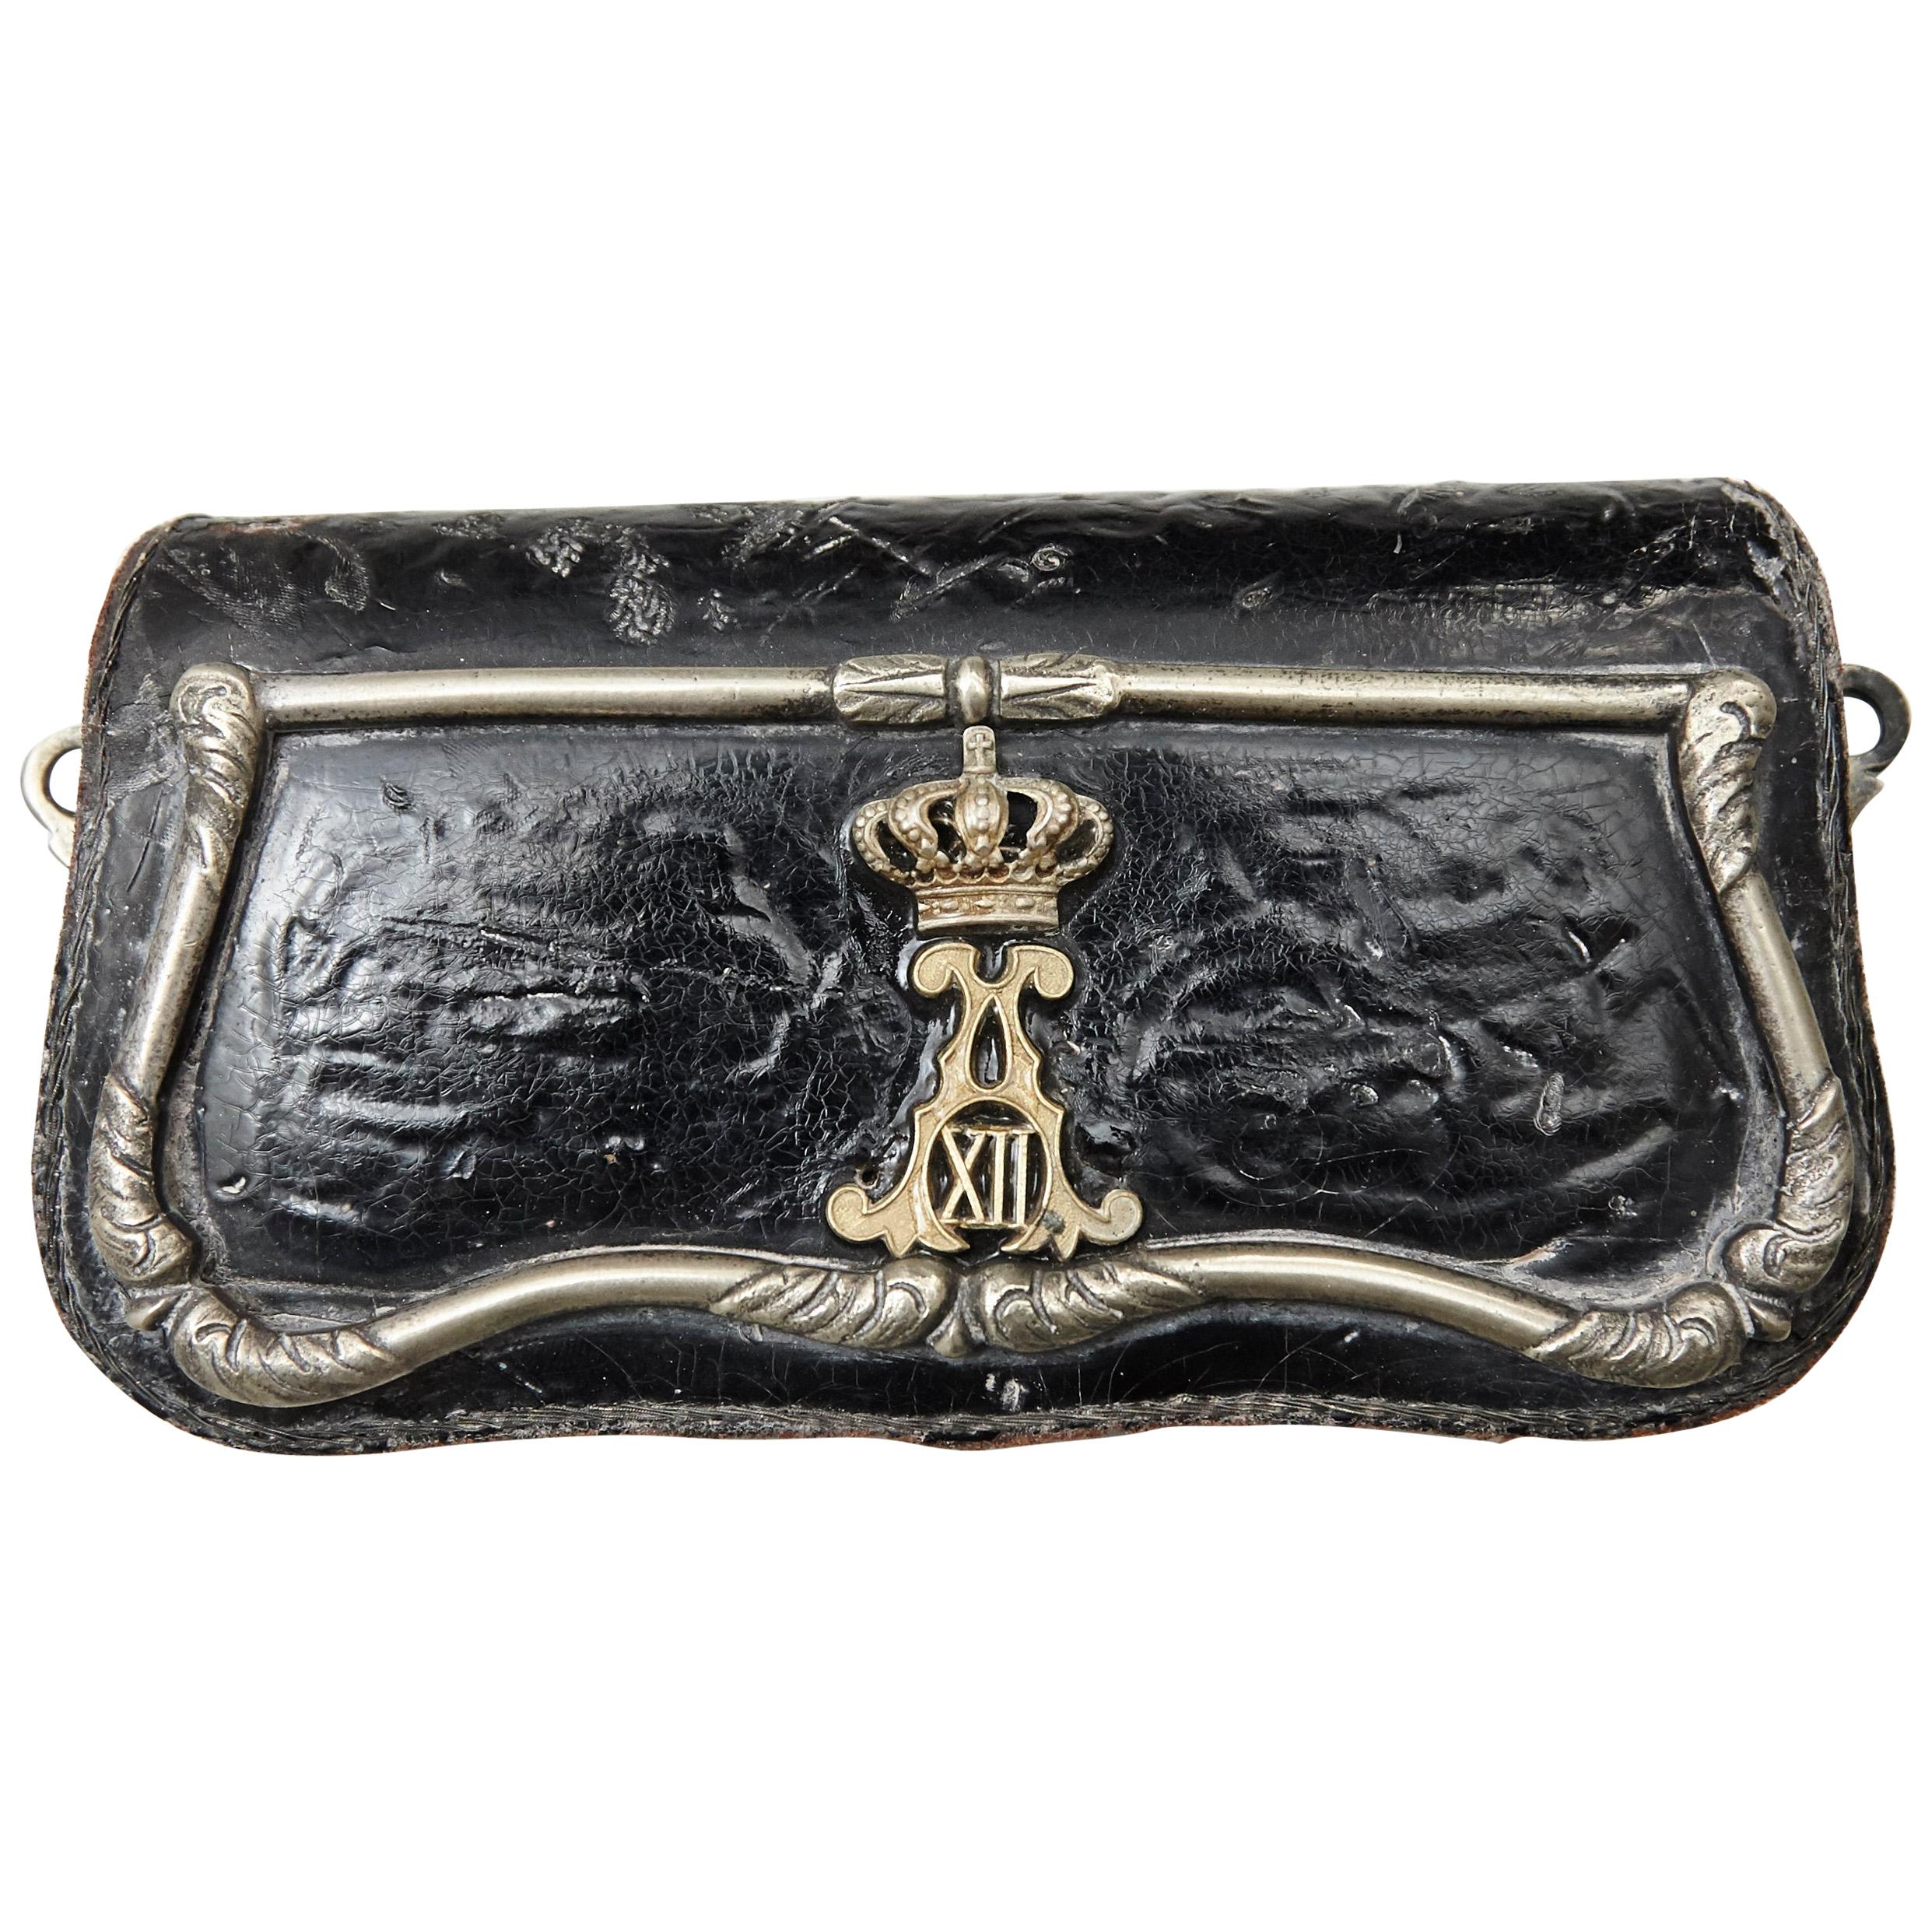 19th Century Alfonso XII Cartridge Holder